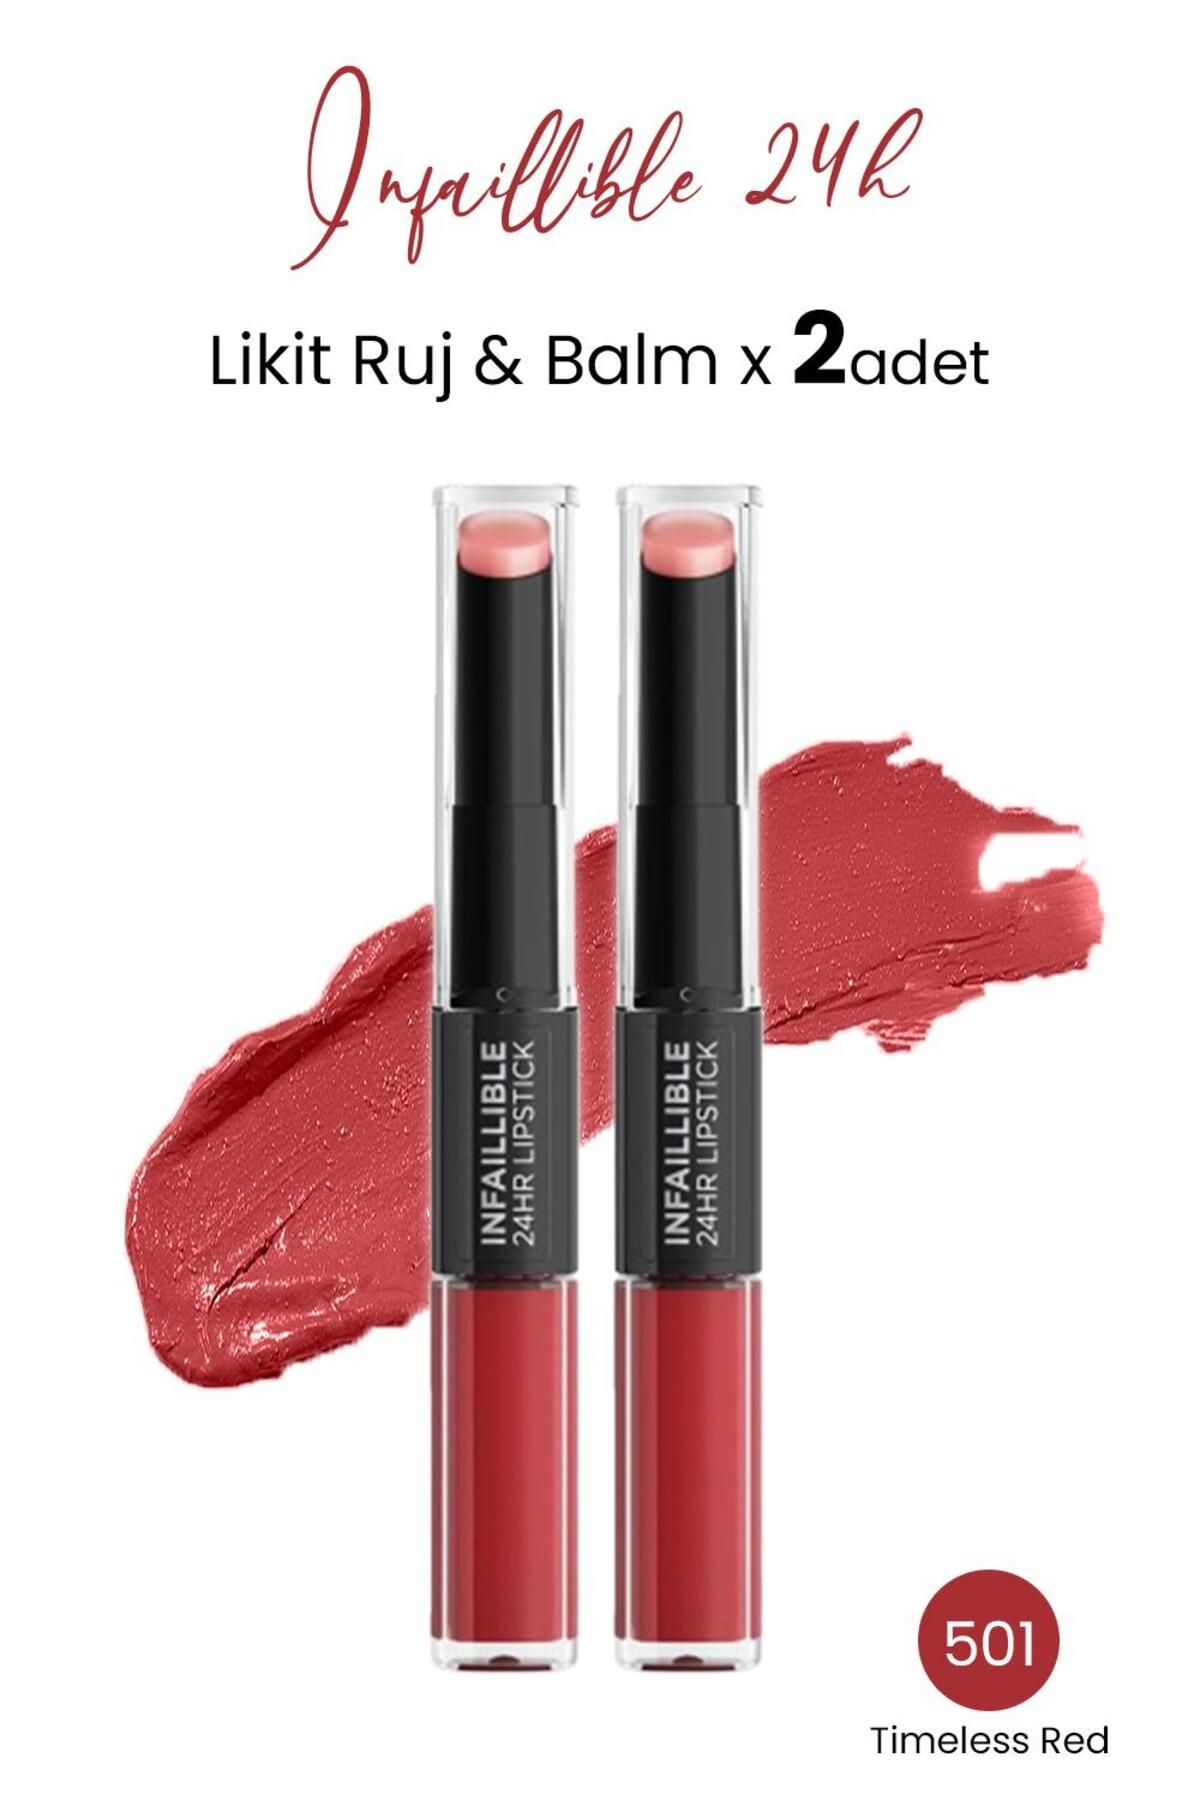 L'Oreal Paris Infaillible 24h Likit Ruj & Balm 501 Timeless Red X 2 Adet